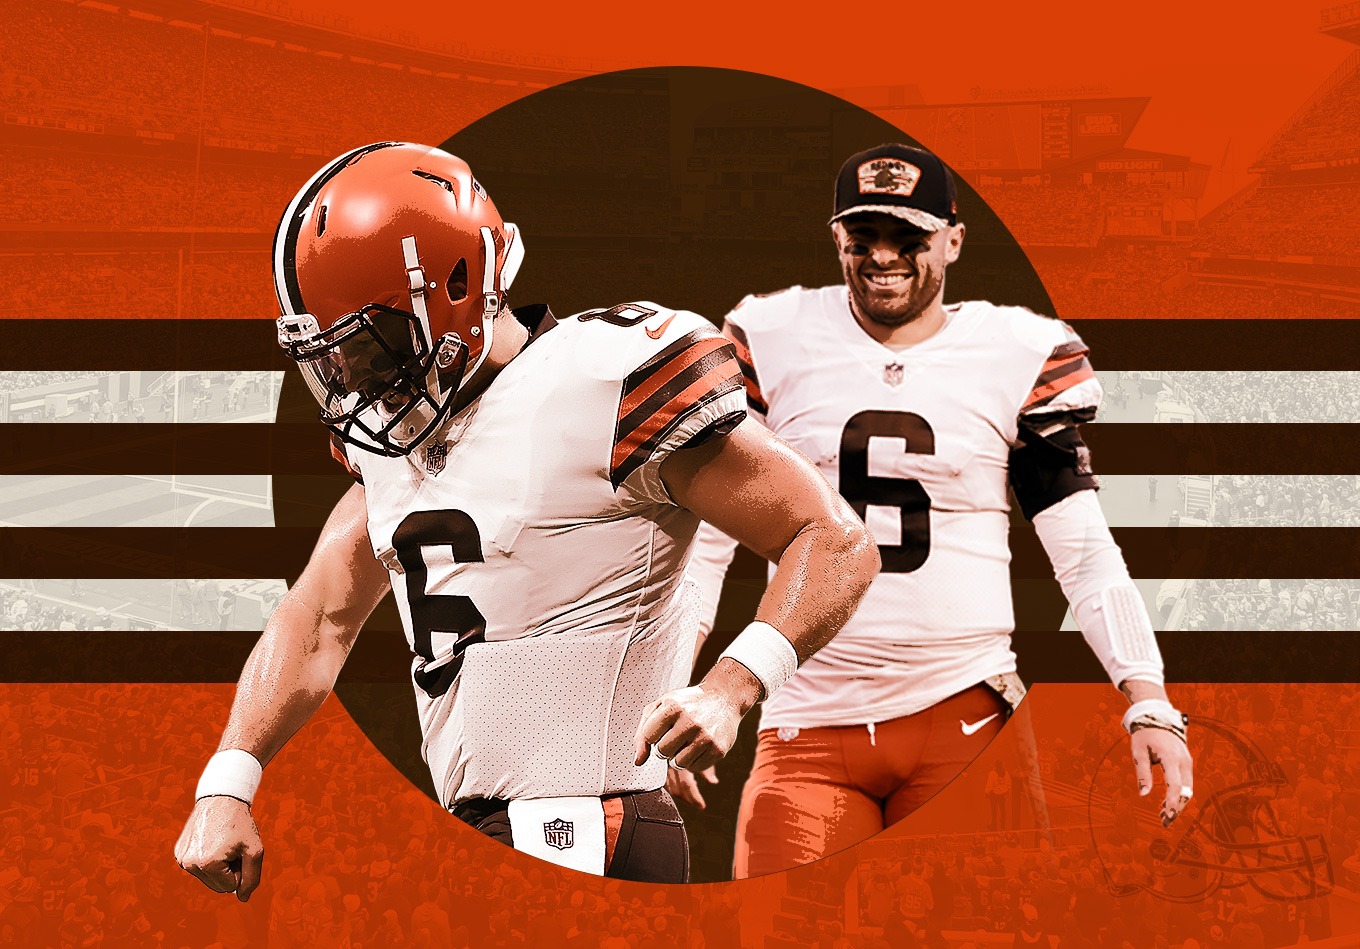 What Should the Browns Do About Their Baker Mayfield Problem?